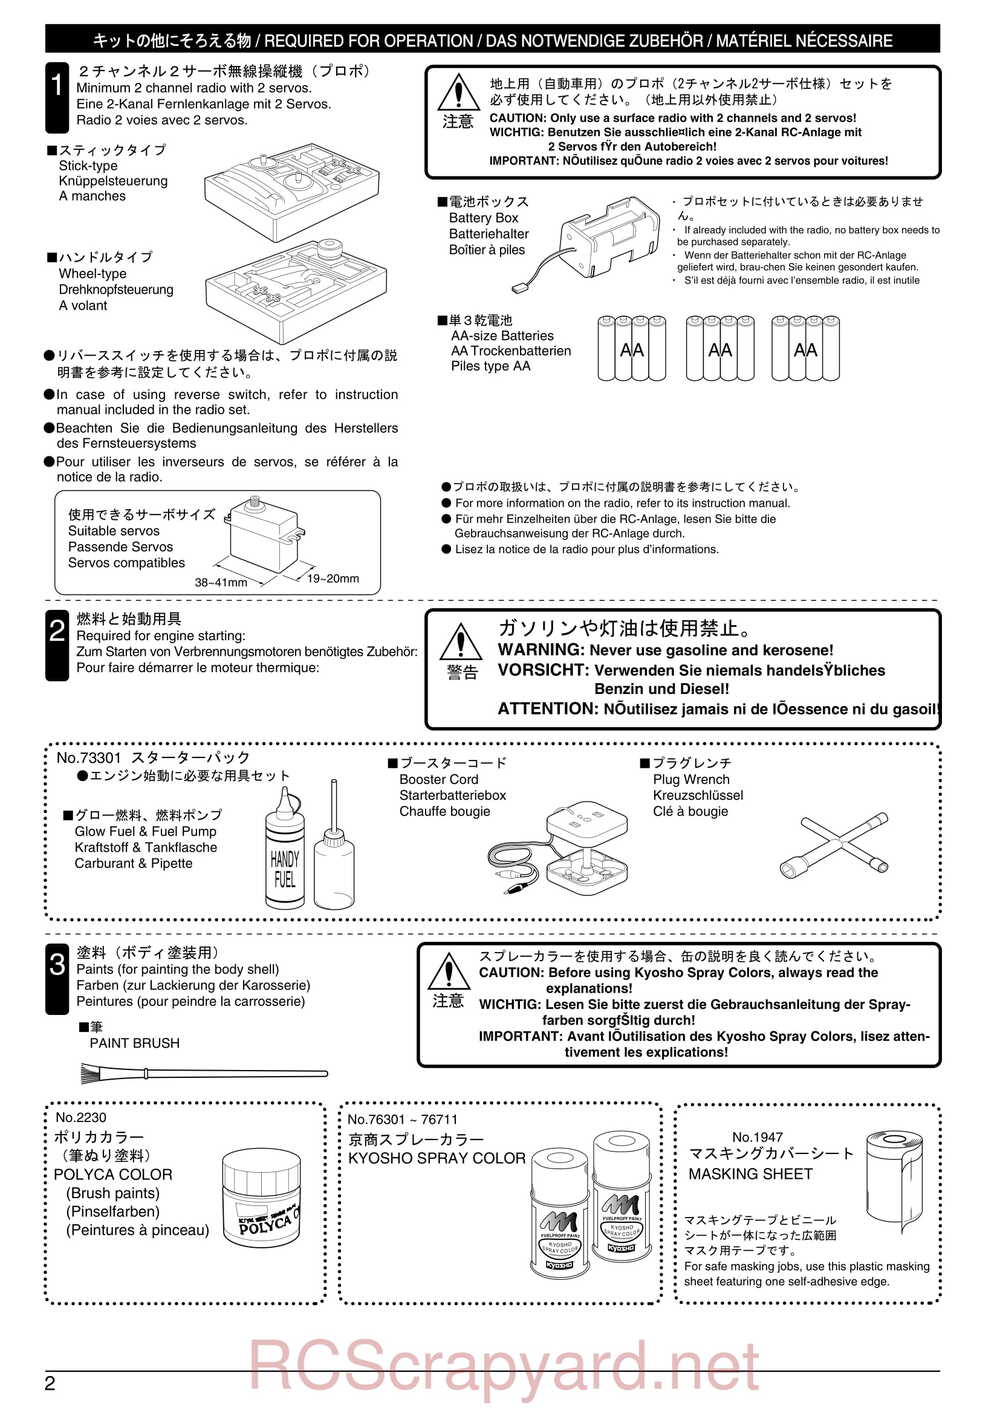 Kyosho - 31241 - V-One-S - Manual - Page 02